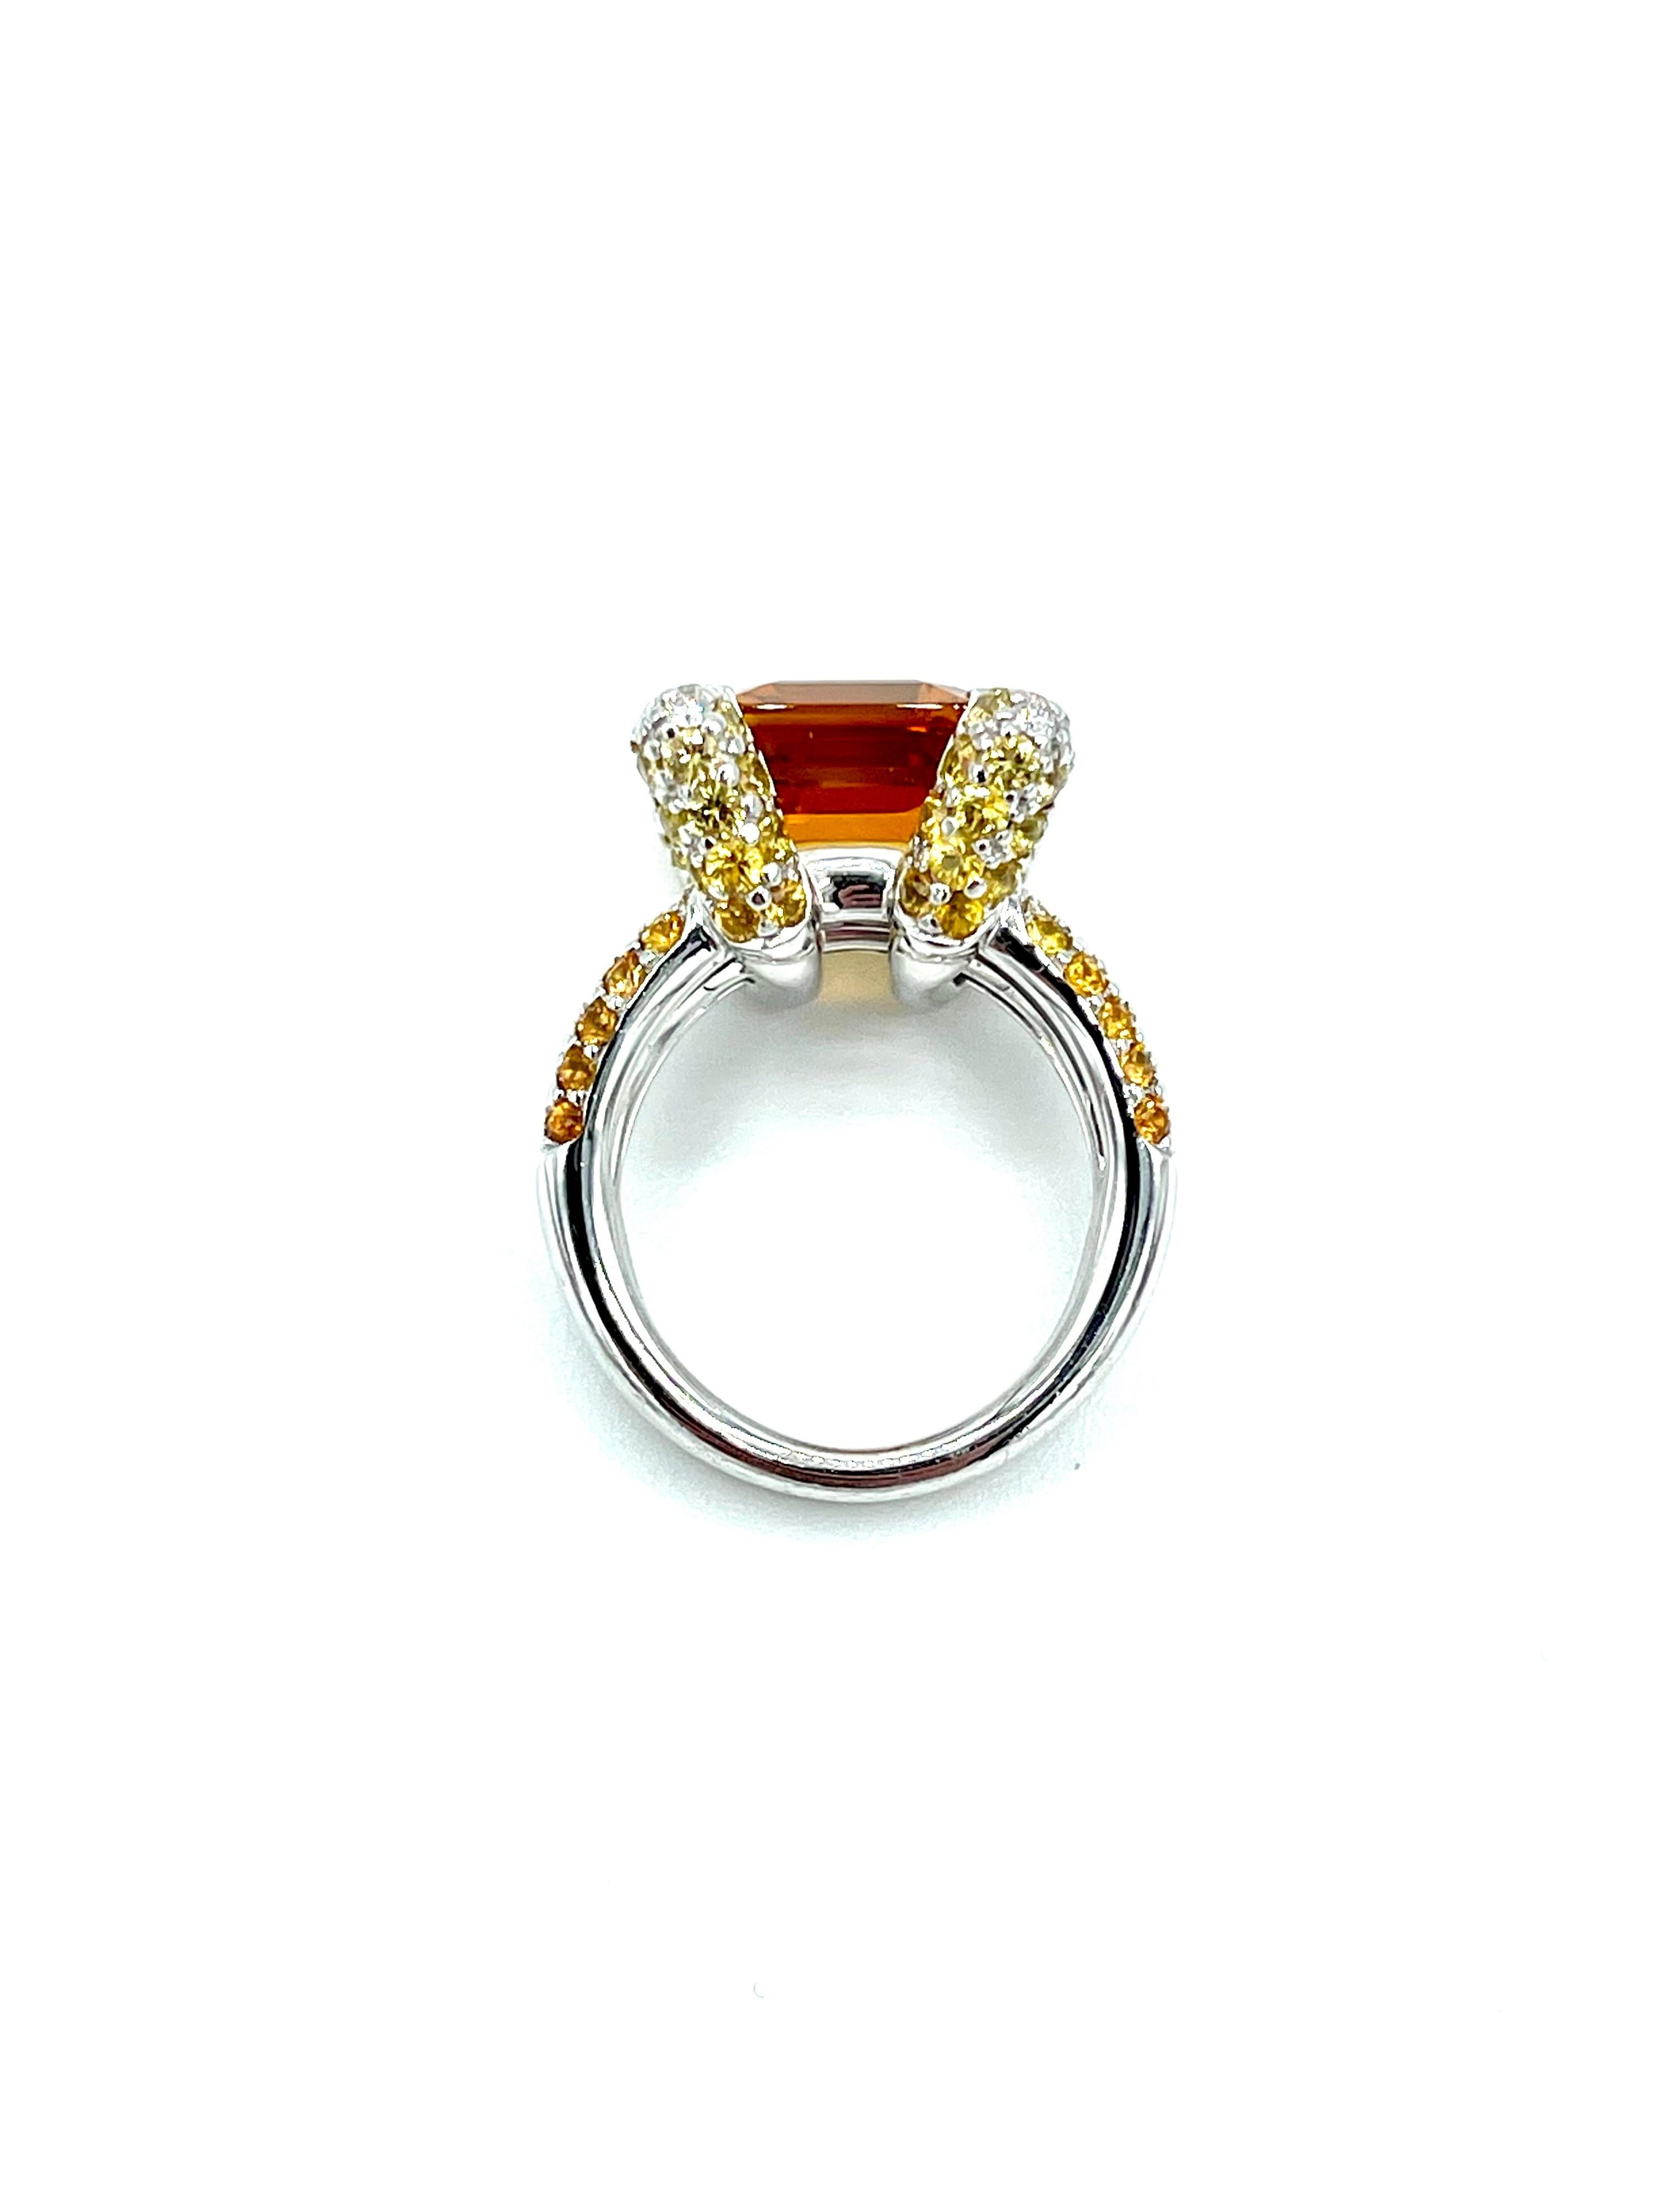 Emerald Cut 6.00 Carat Madeira Citrine in a Pave Diamond and Citrine White Gold Ring For Sale